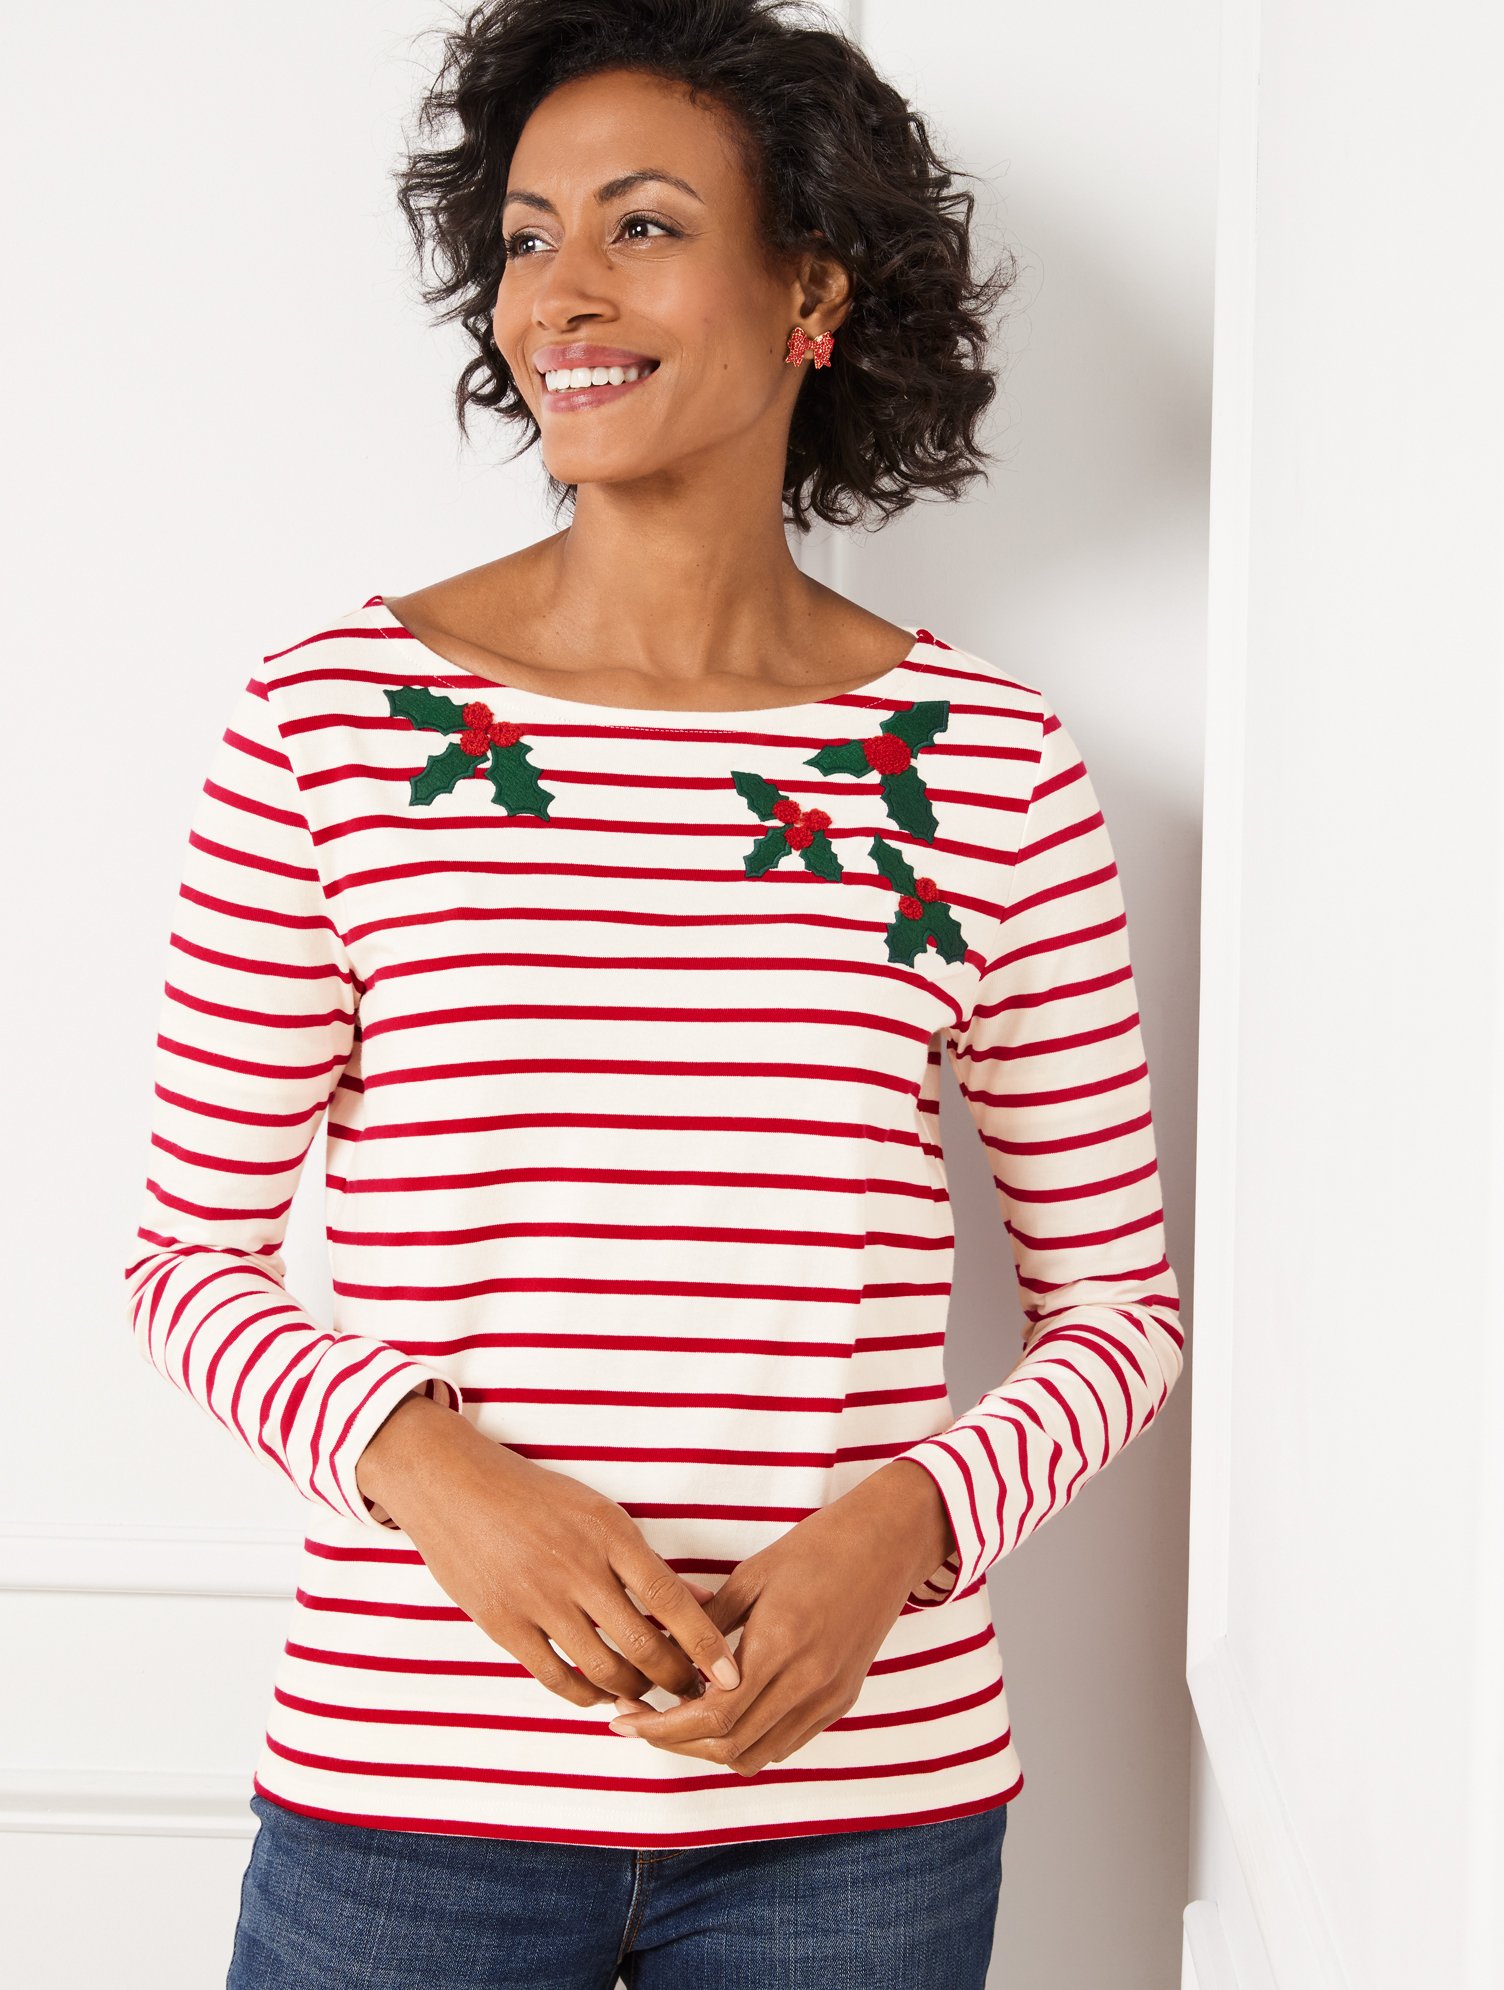 Talbots Petite - Embroidered Bateau Neck T-shirt - Holly Berry - Ivory/red - Small - 100% Cotton  In Ivory,red